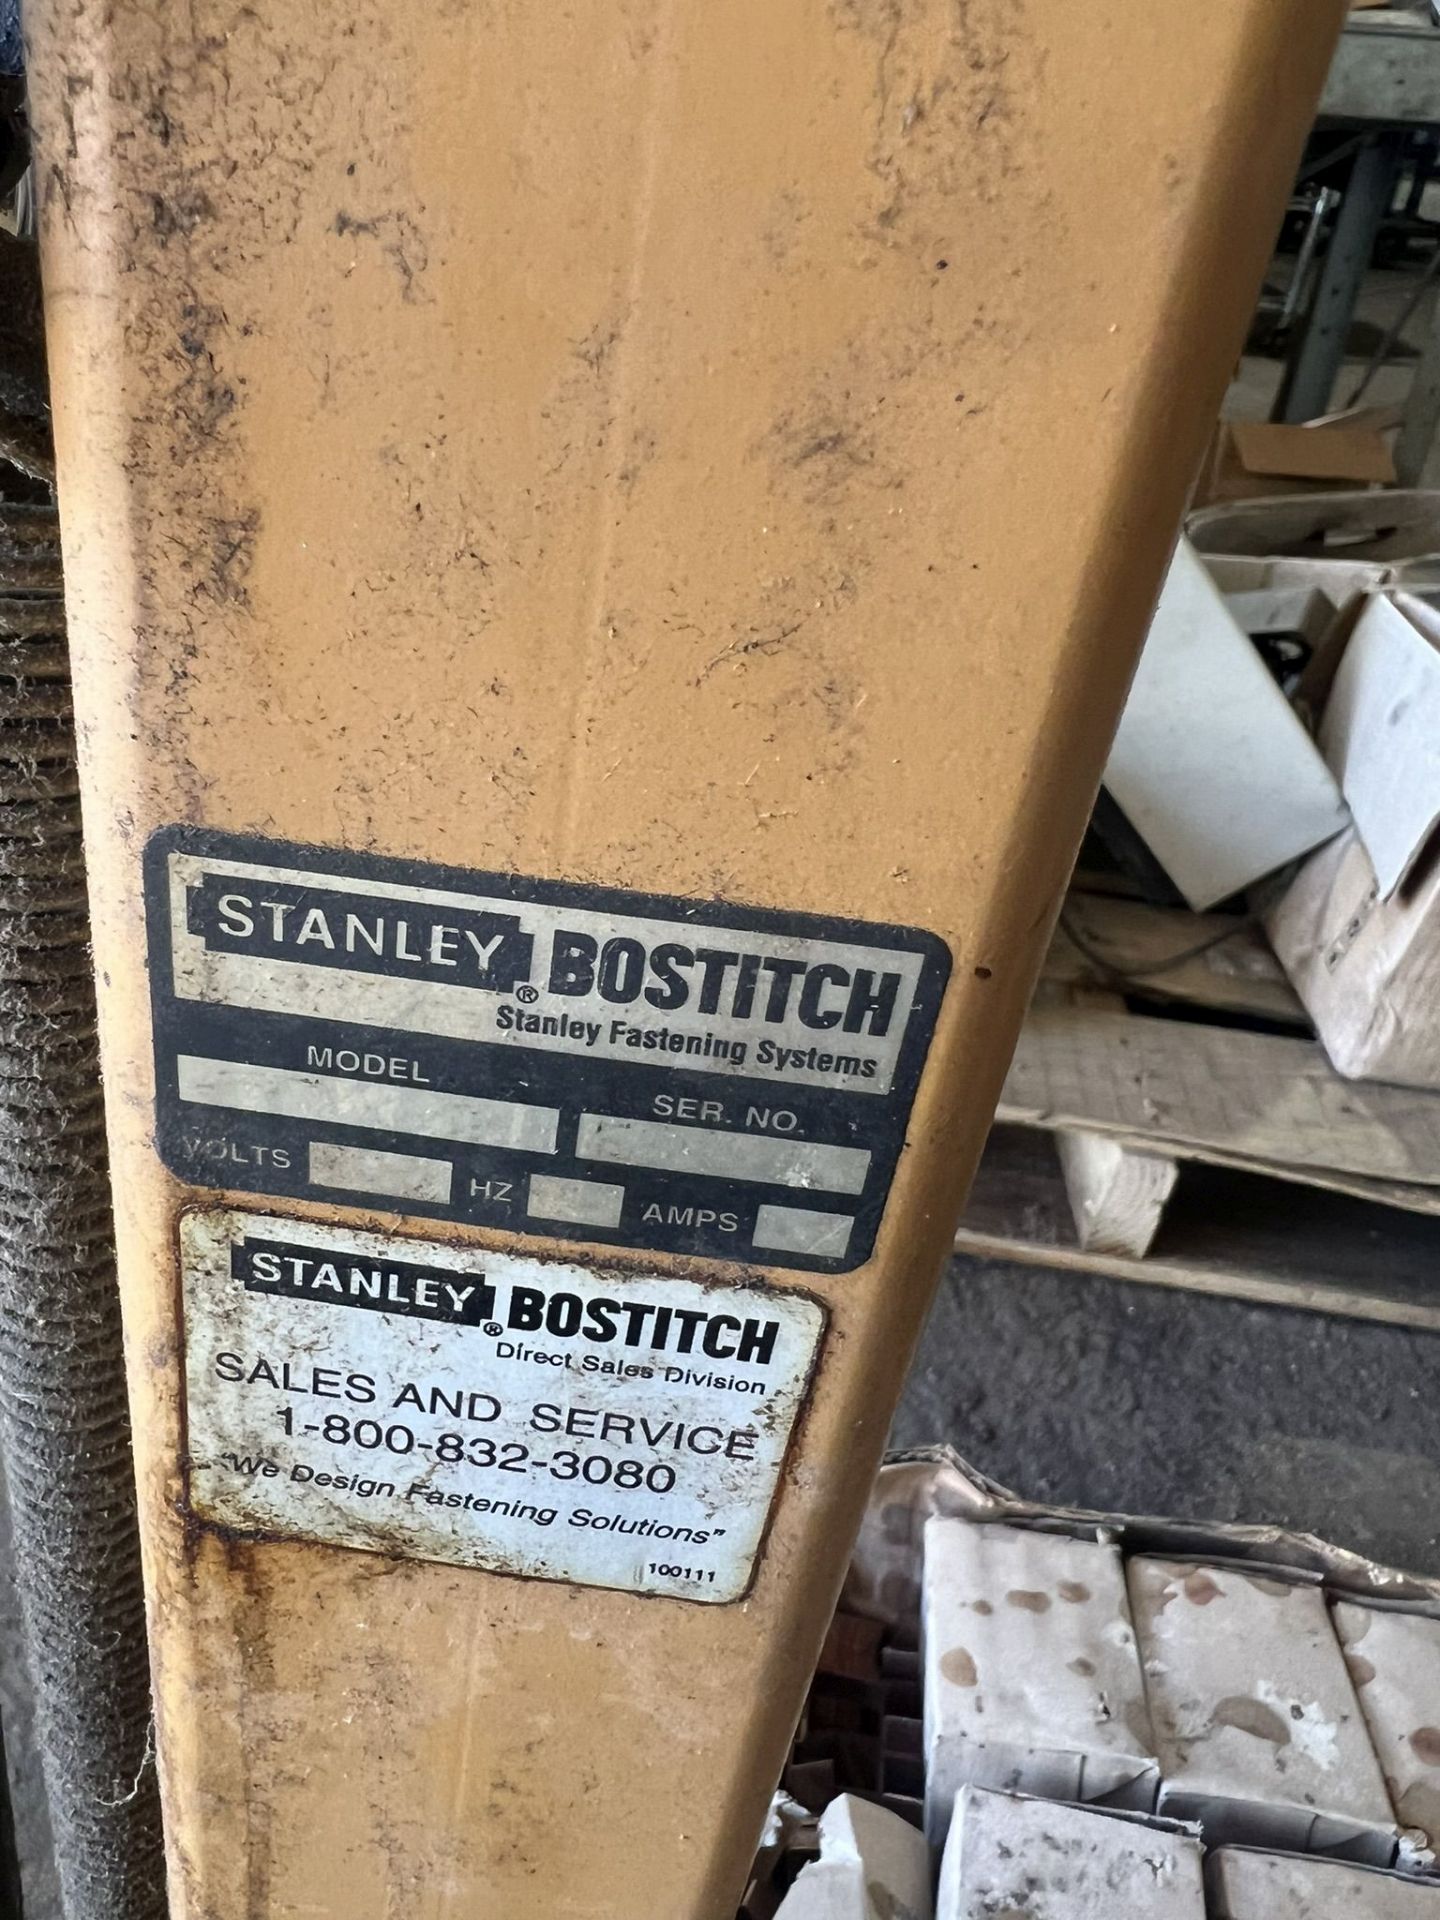 Stanley Bostitch Foot Control Stapler & Heavy Duty Staples - Image 2 of 2